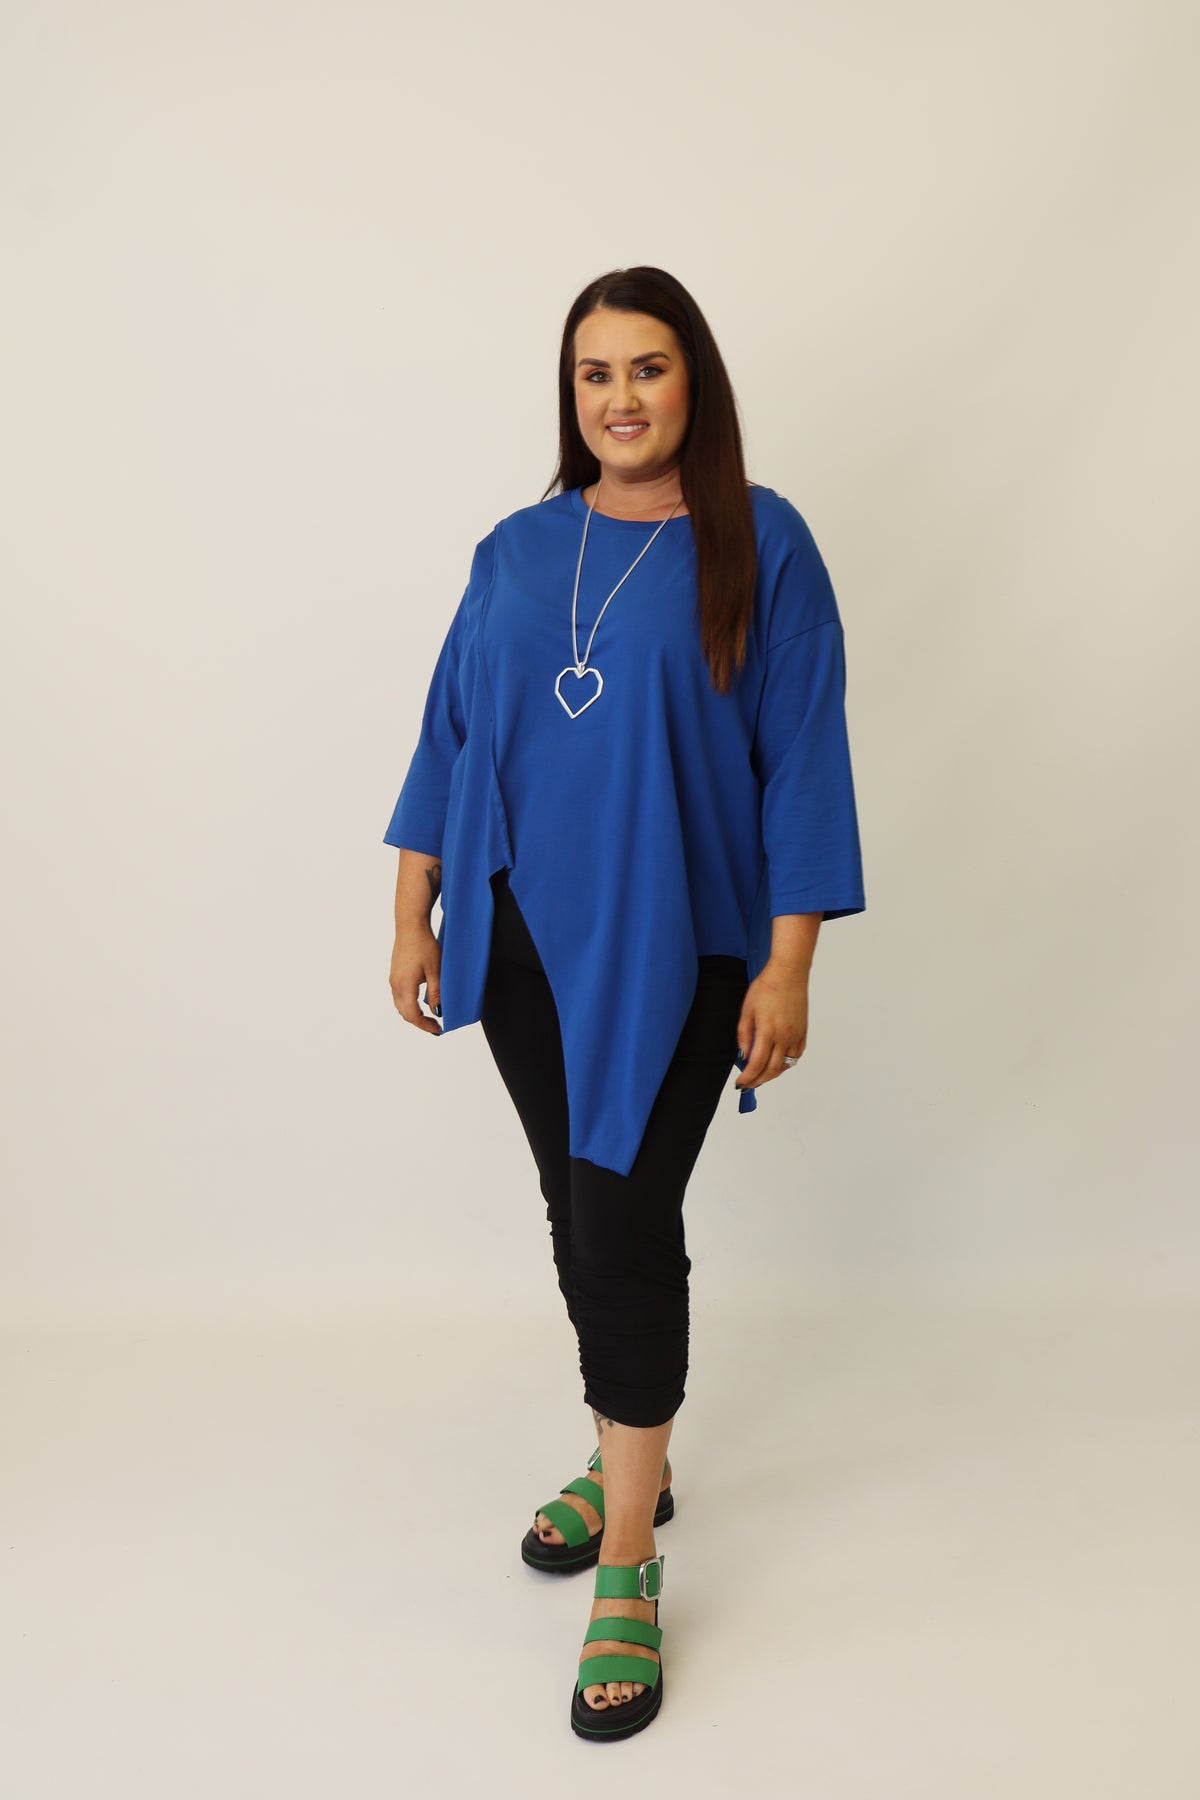 Lainey Top In Blue